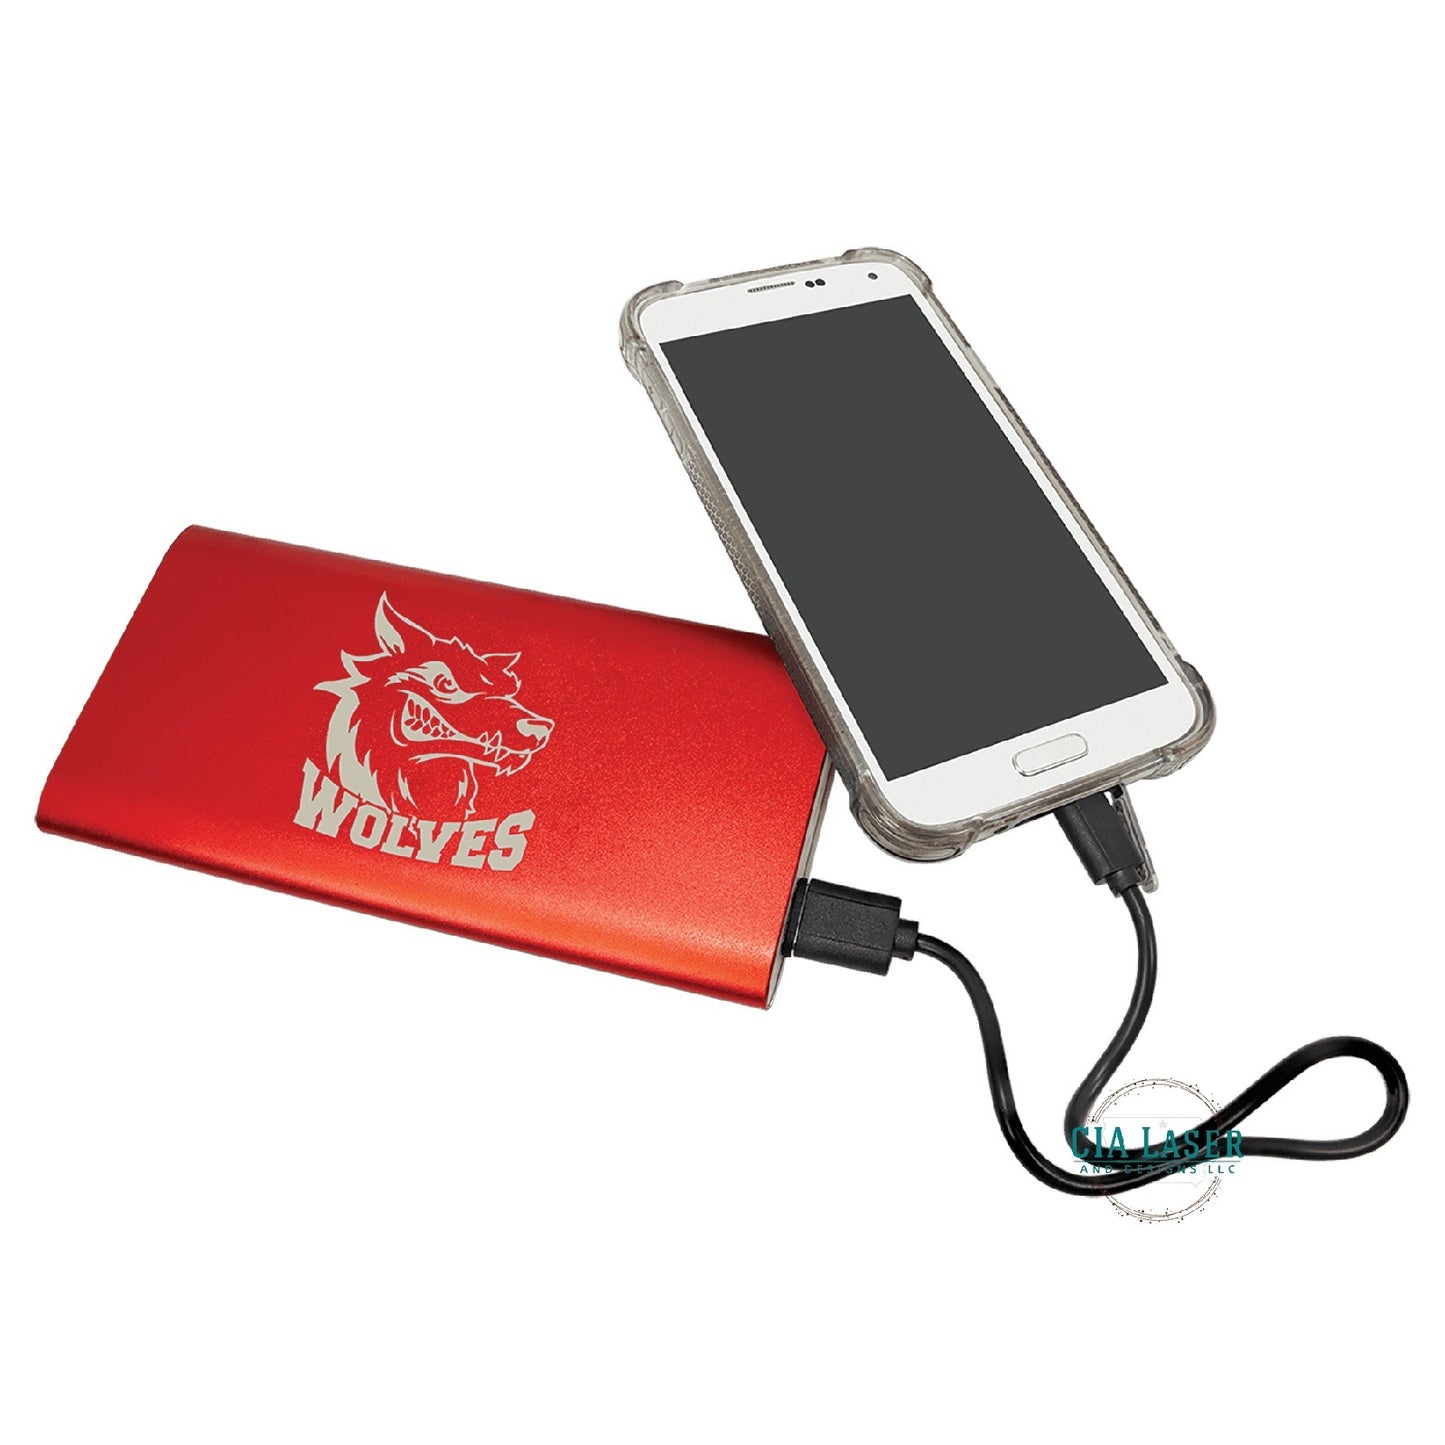 Power Bank and Anodized Aluminum Wireless Charger with Power Cord Personalized Engraved